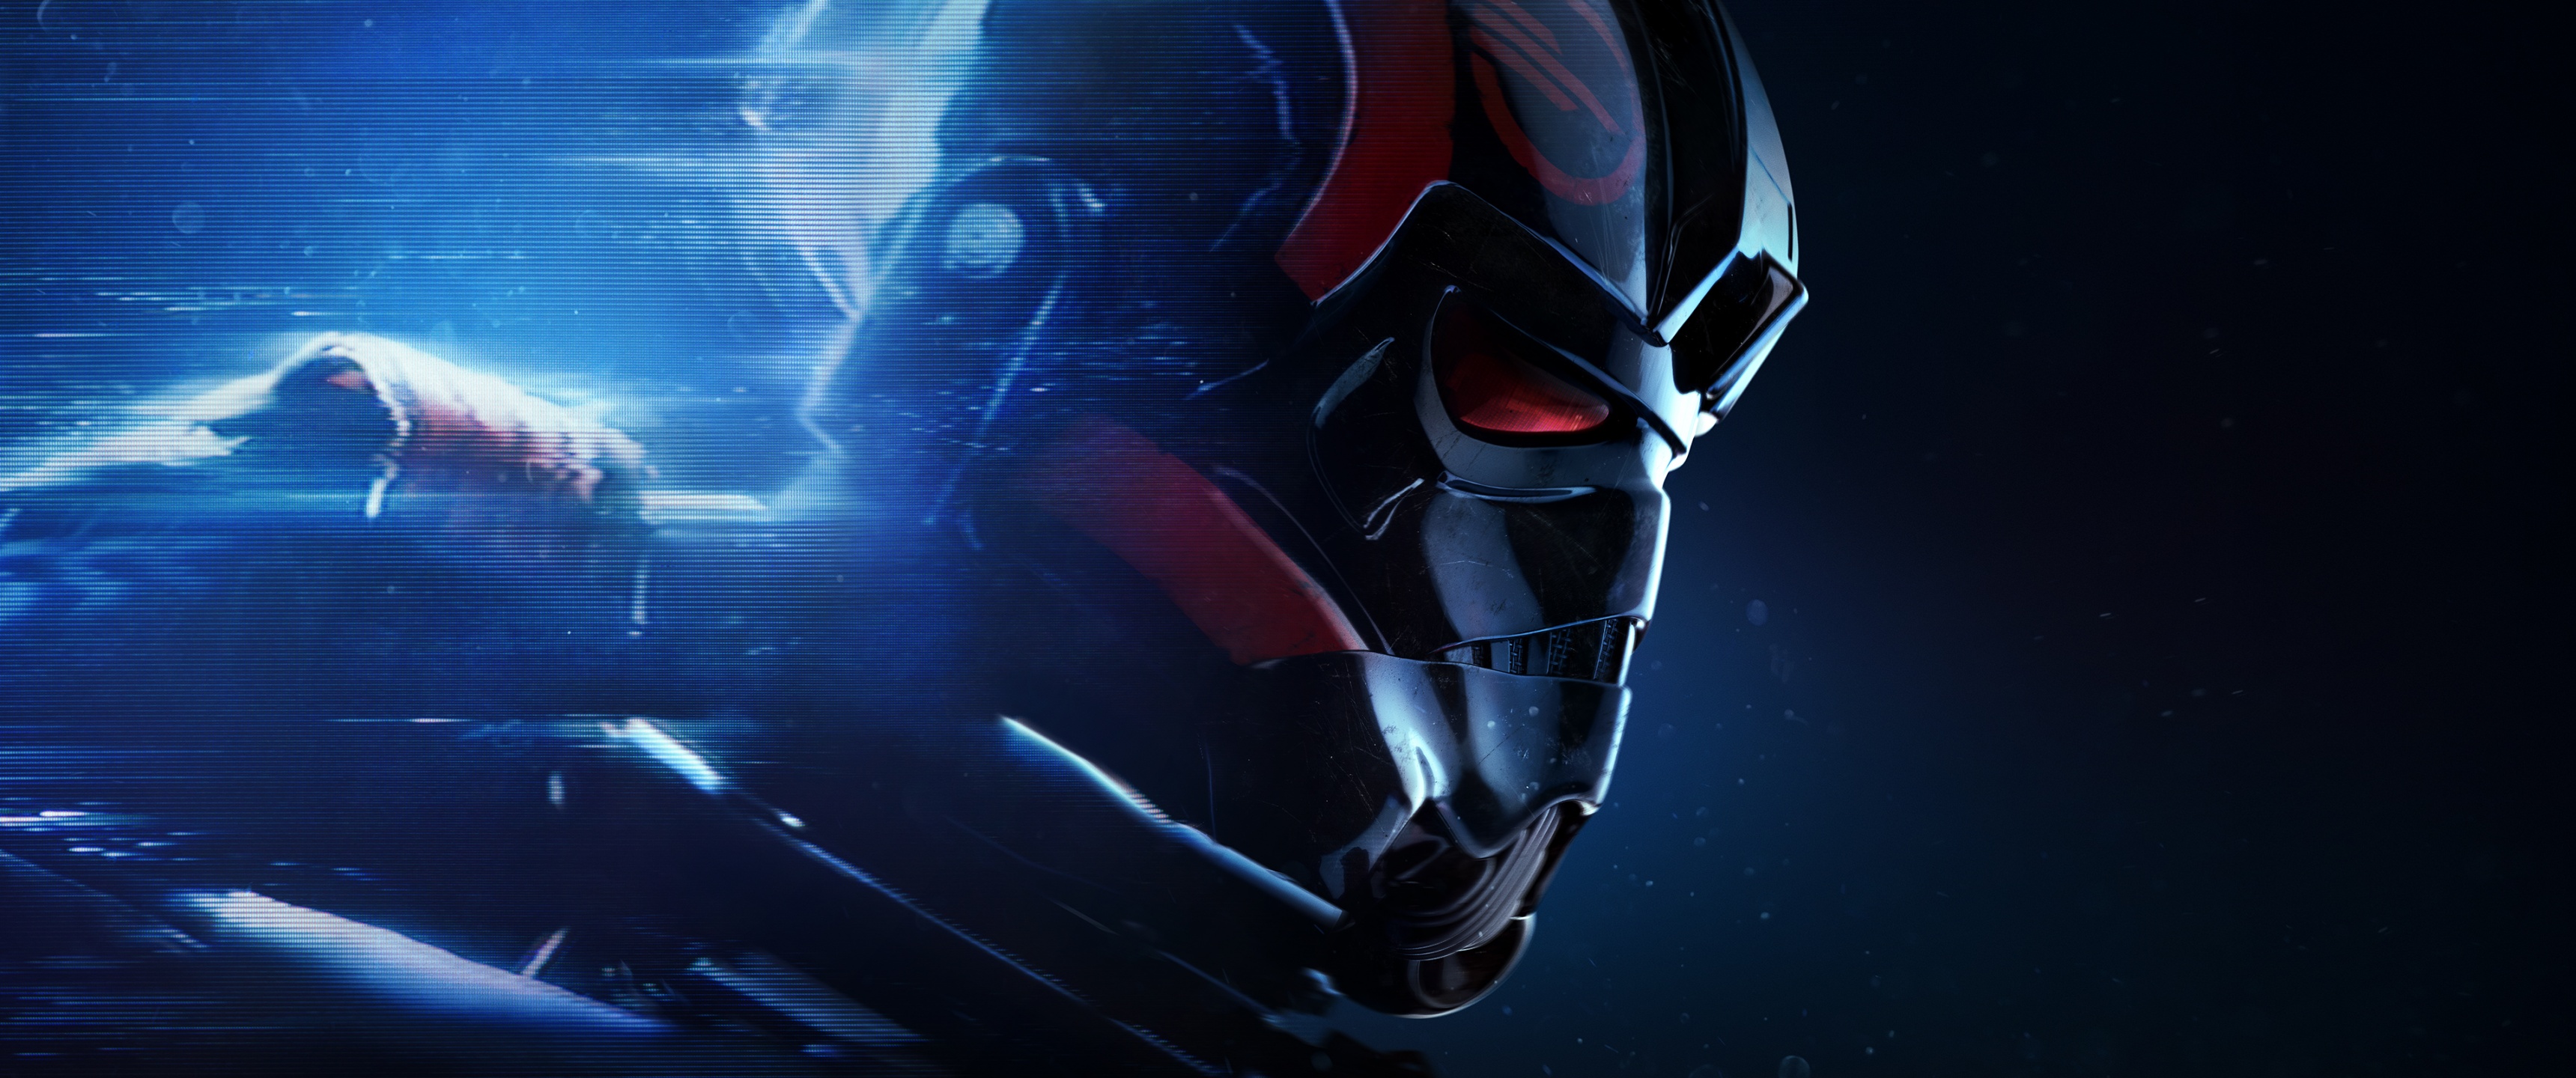 Star Wars Battlefront II Wallpaper 4K, PC Games, PlayStation Xbox One, Games